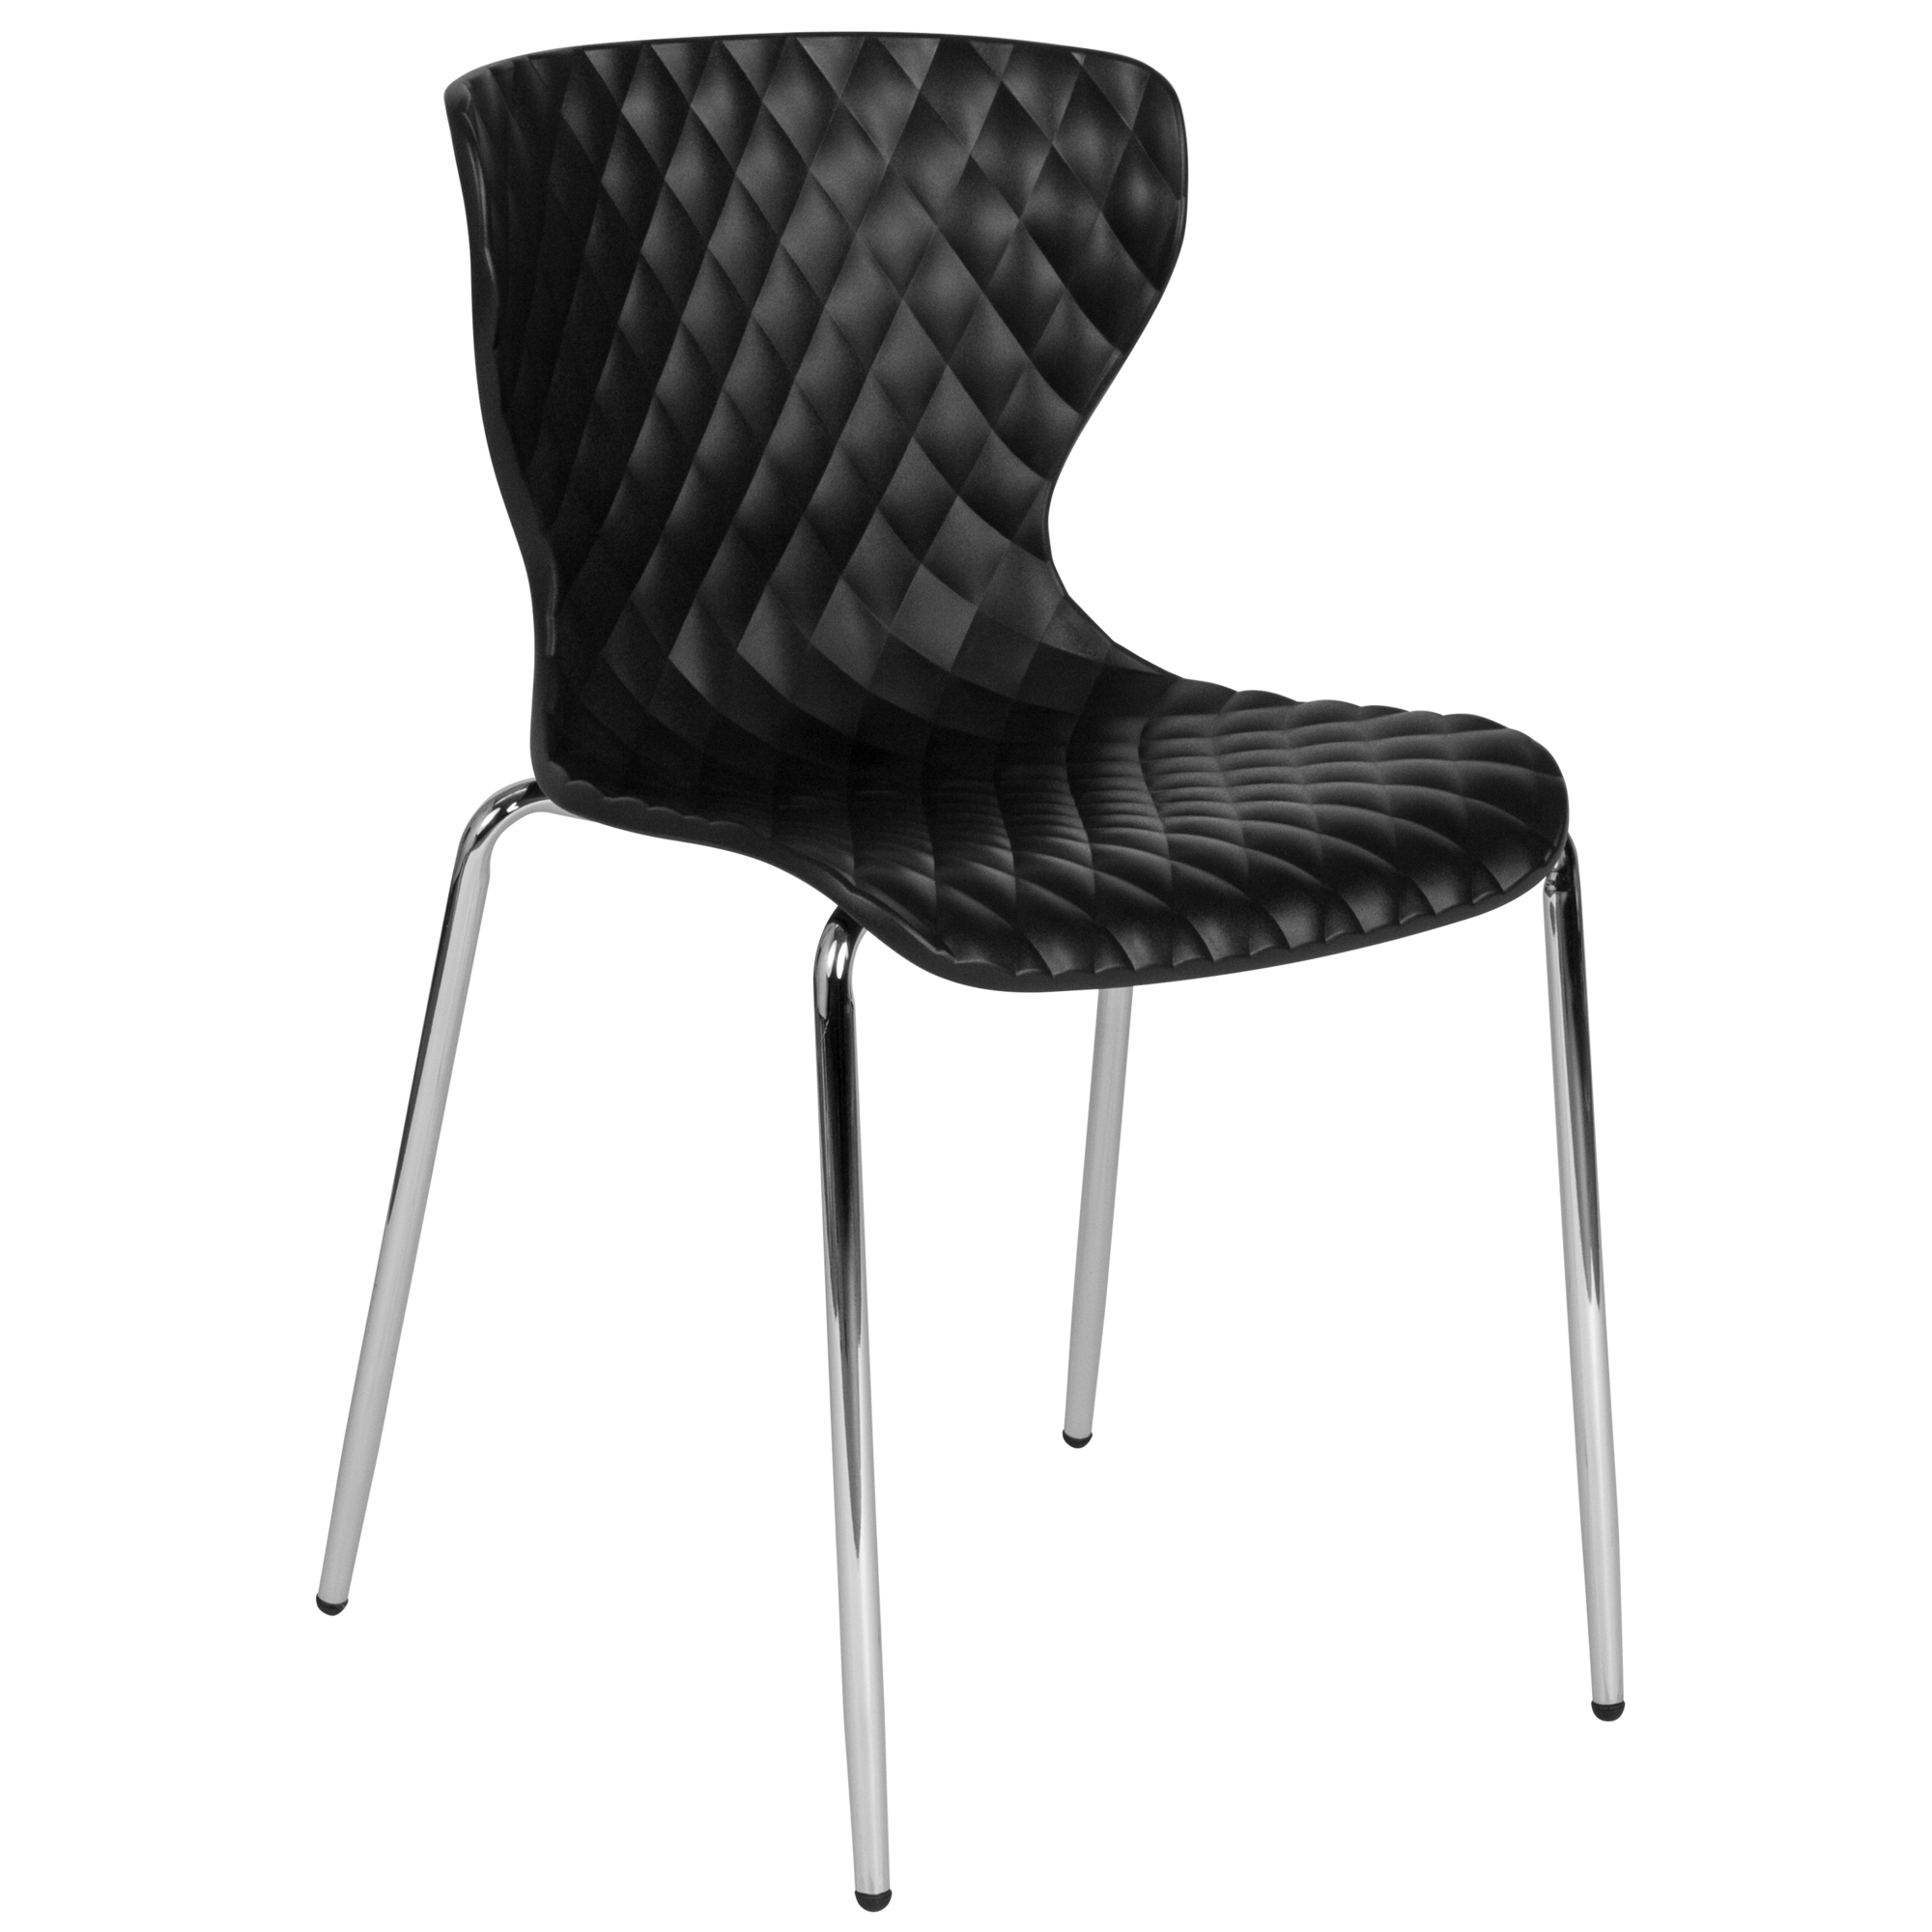 Flash Furniture, Contemporary Black Plastic Stack Chair, Primary Color Black, Included (qty.) 1, Model LF707CBLK